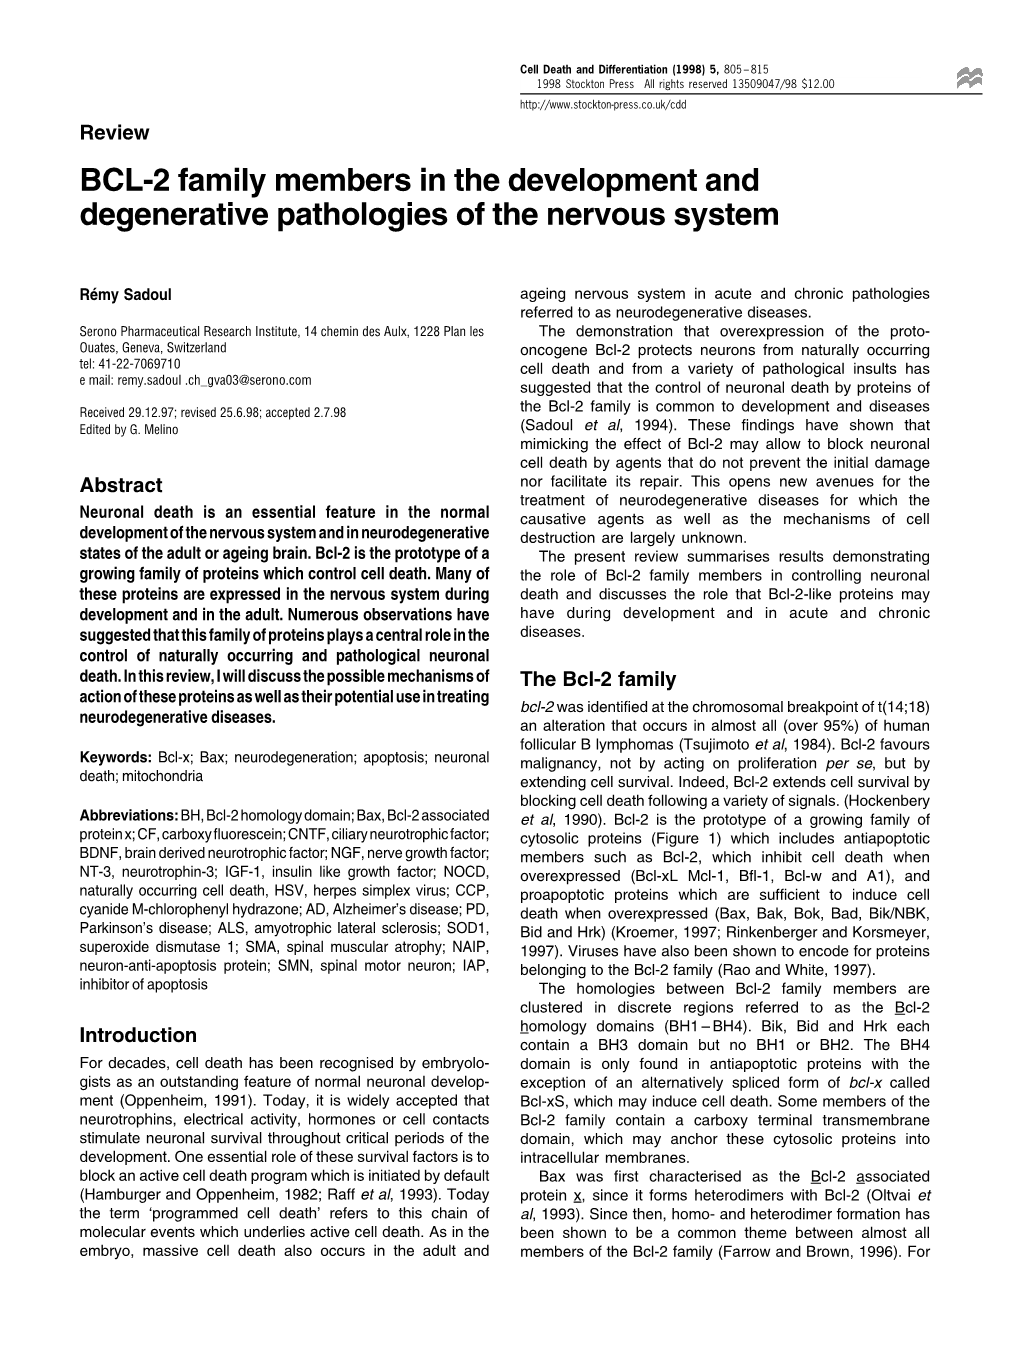 BCL-2 Family Members in the Development and Degenerative Pathologies of the Nervous System